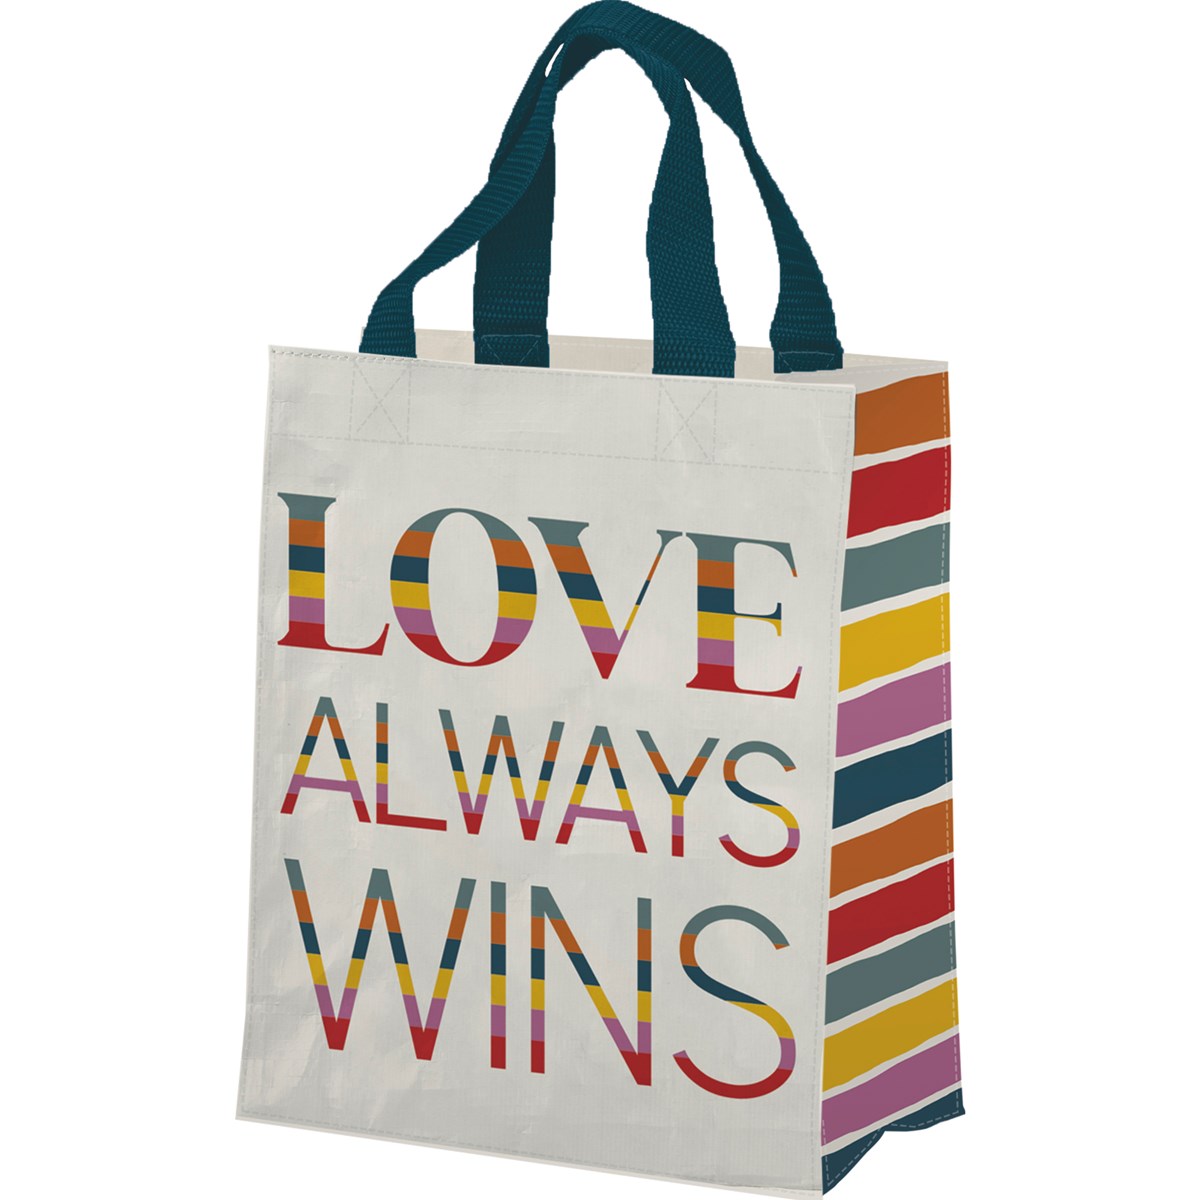 Daily Tote - Love Always Wins - 8.75" x 10.25" x 4.75" - Post-Consumer Material, Nylon